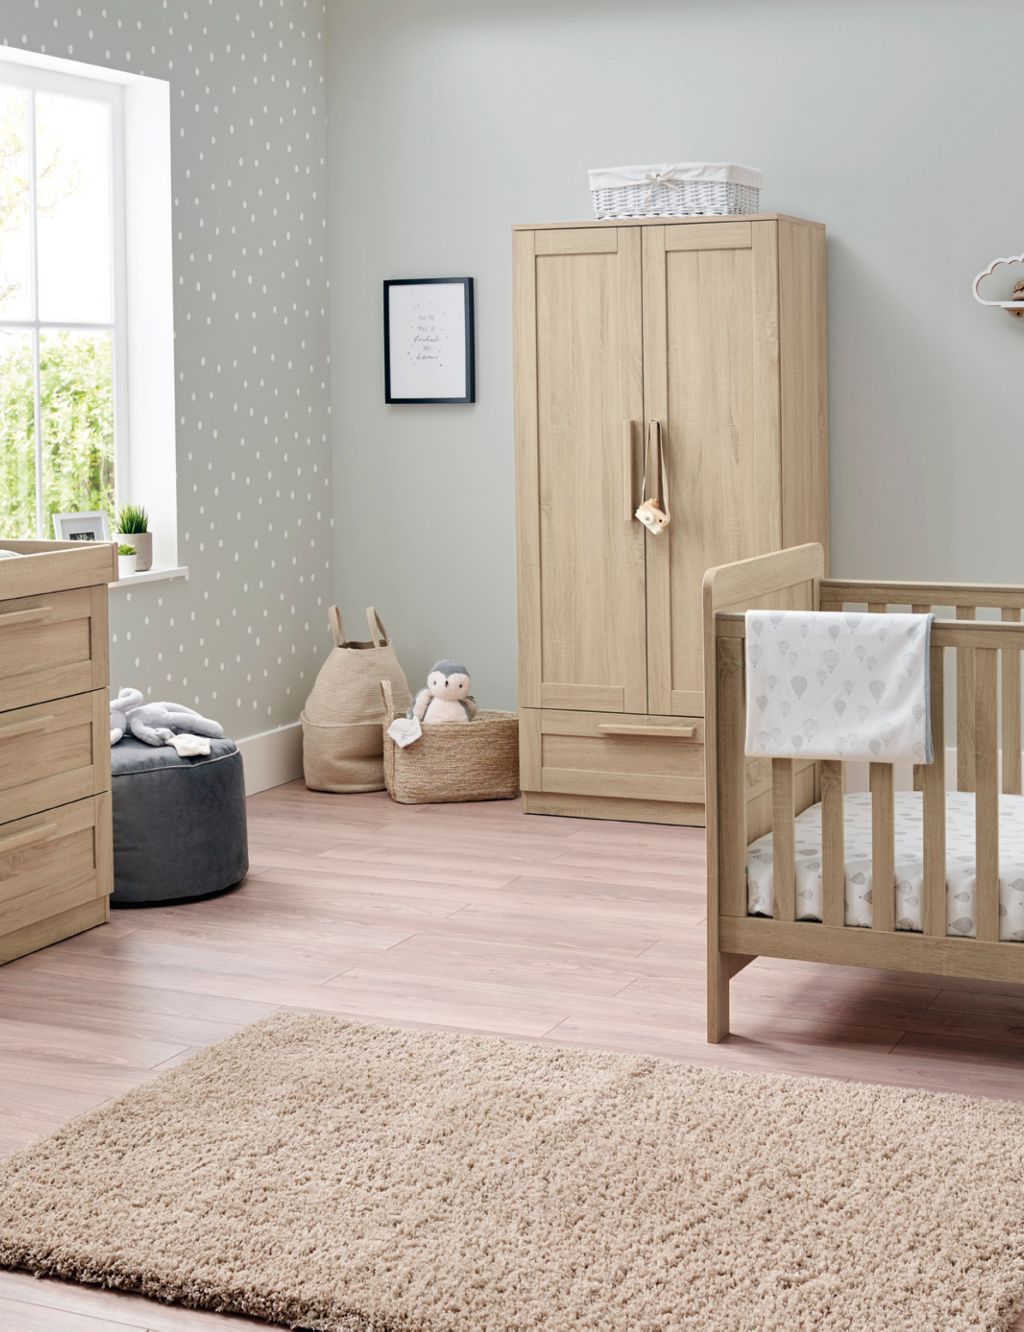 Atlas 3 Piece Cotbed Range with Dresser and Wardrobe image 2